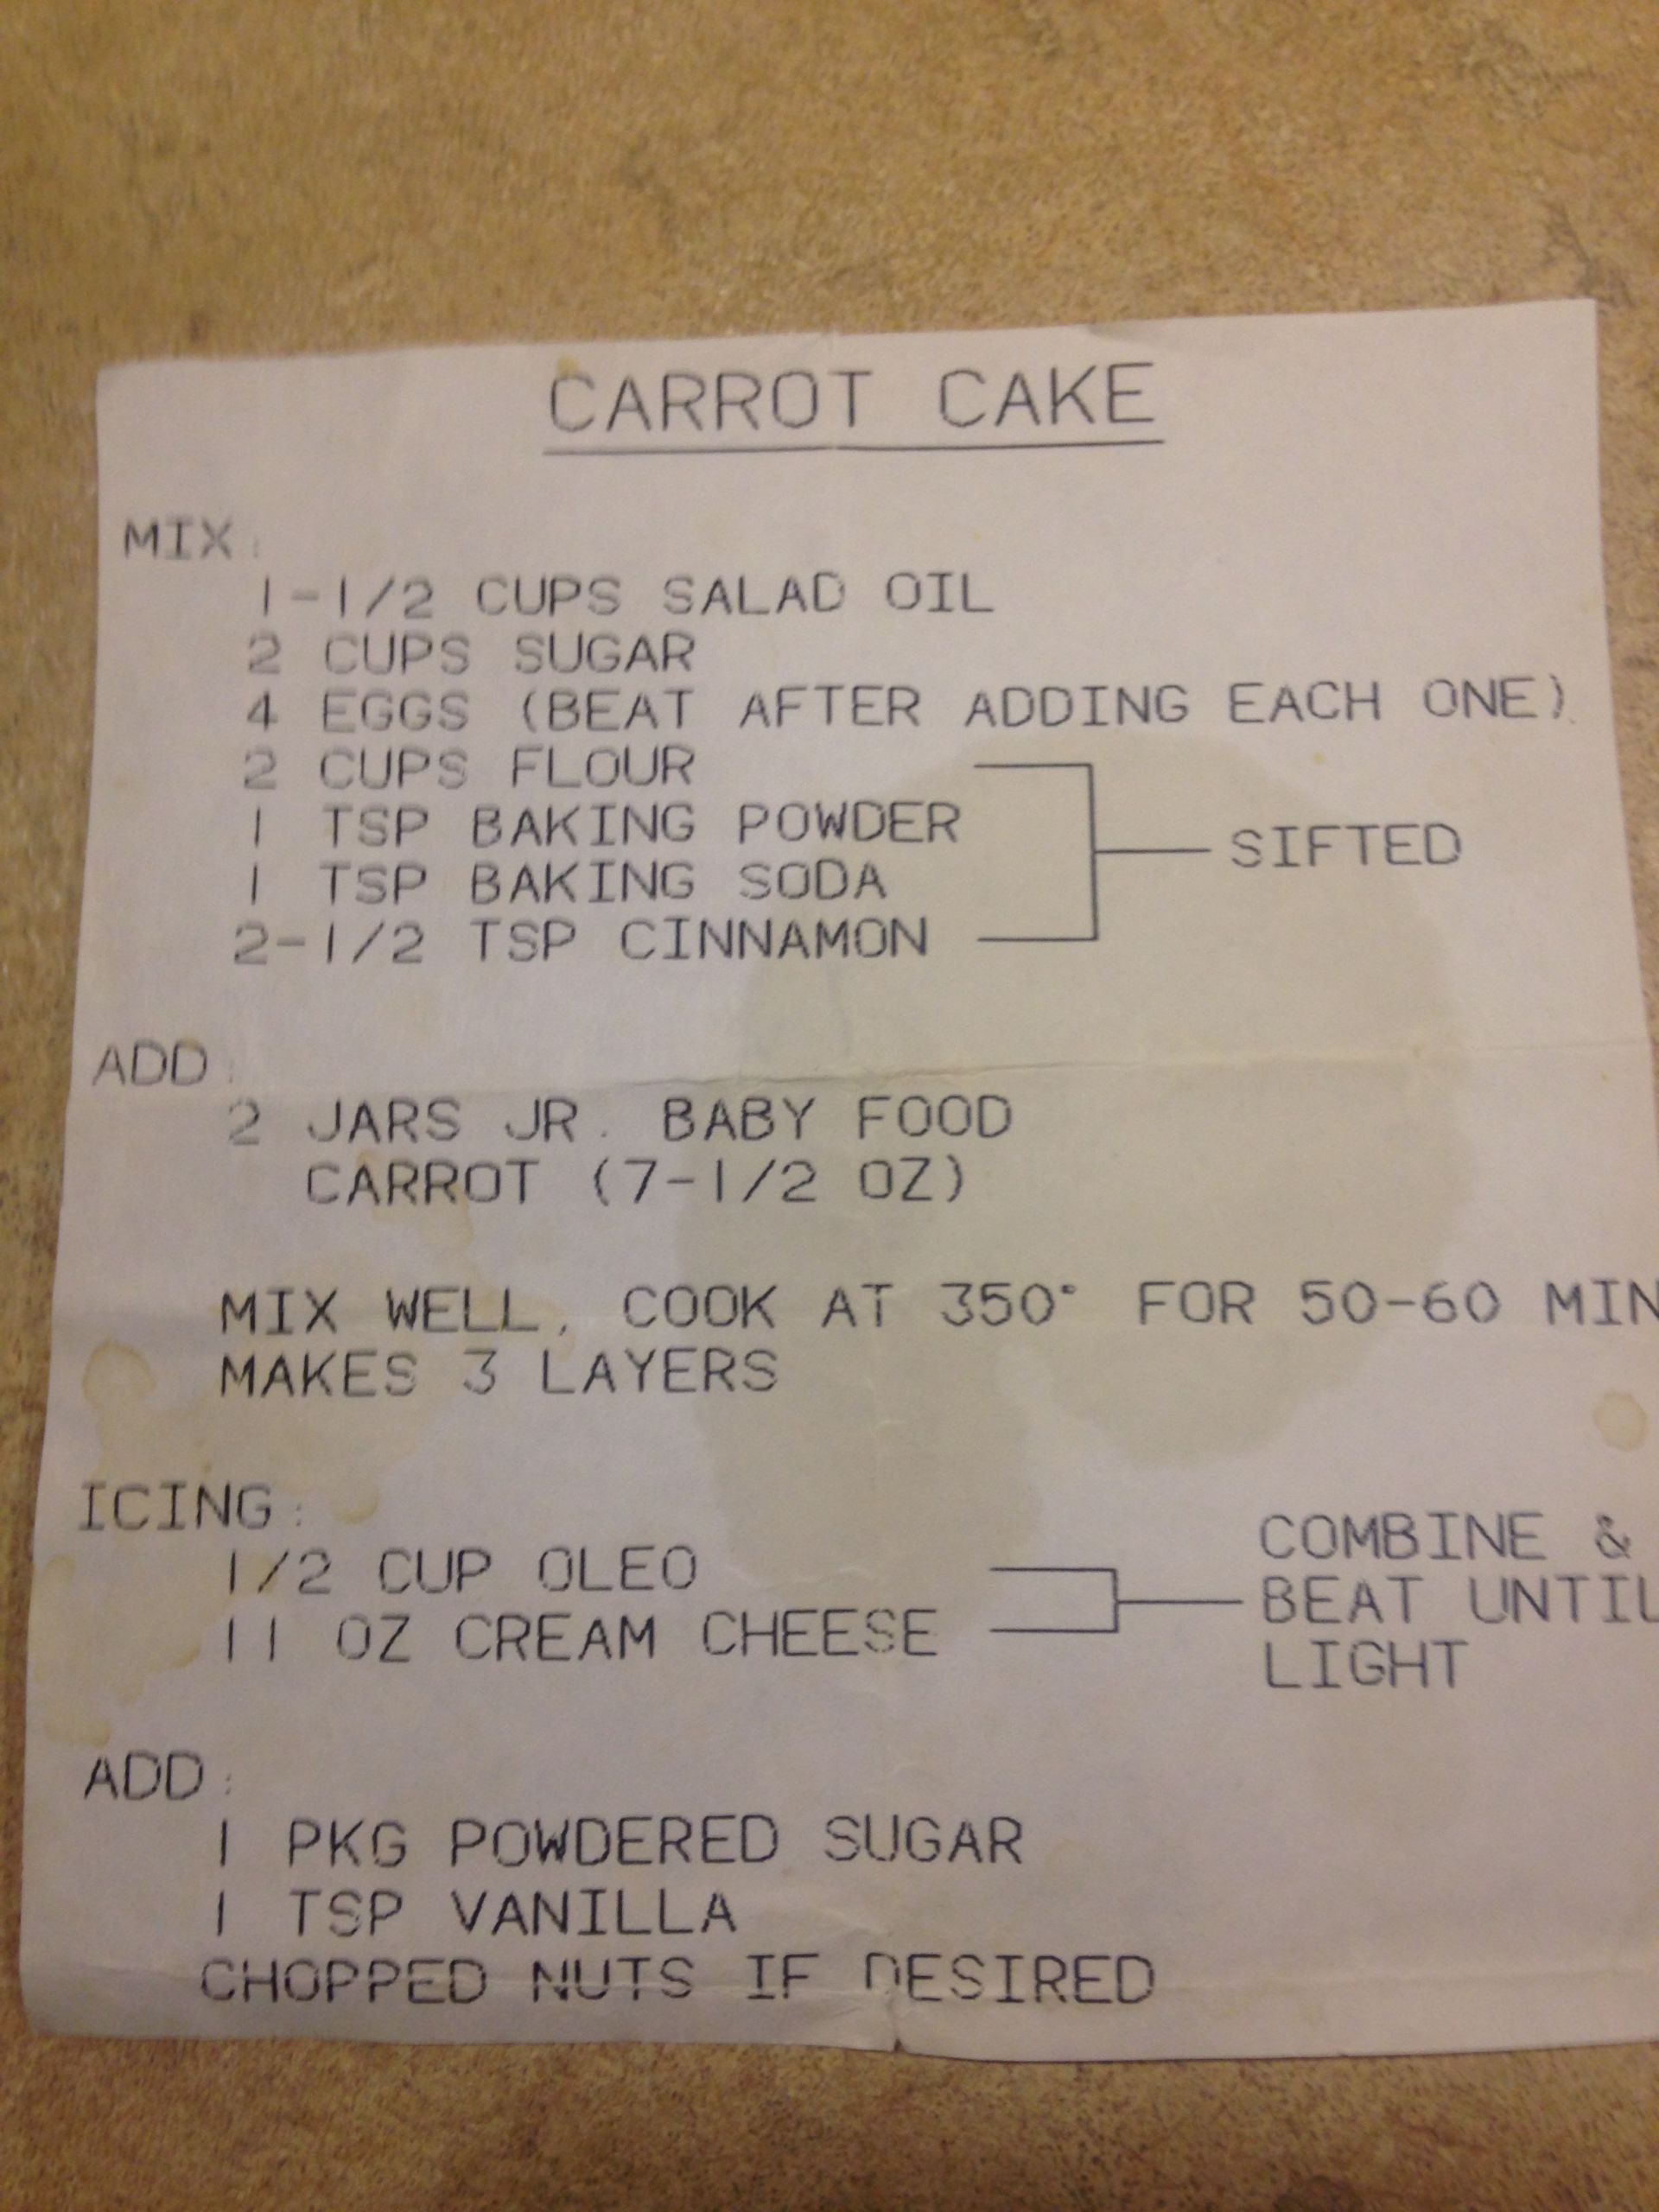 Carrot Cake Recipe Using Baby Food
 Tammy s Carrot Cake made with baby food Can use 2 cups of